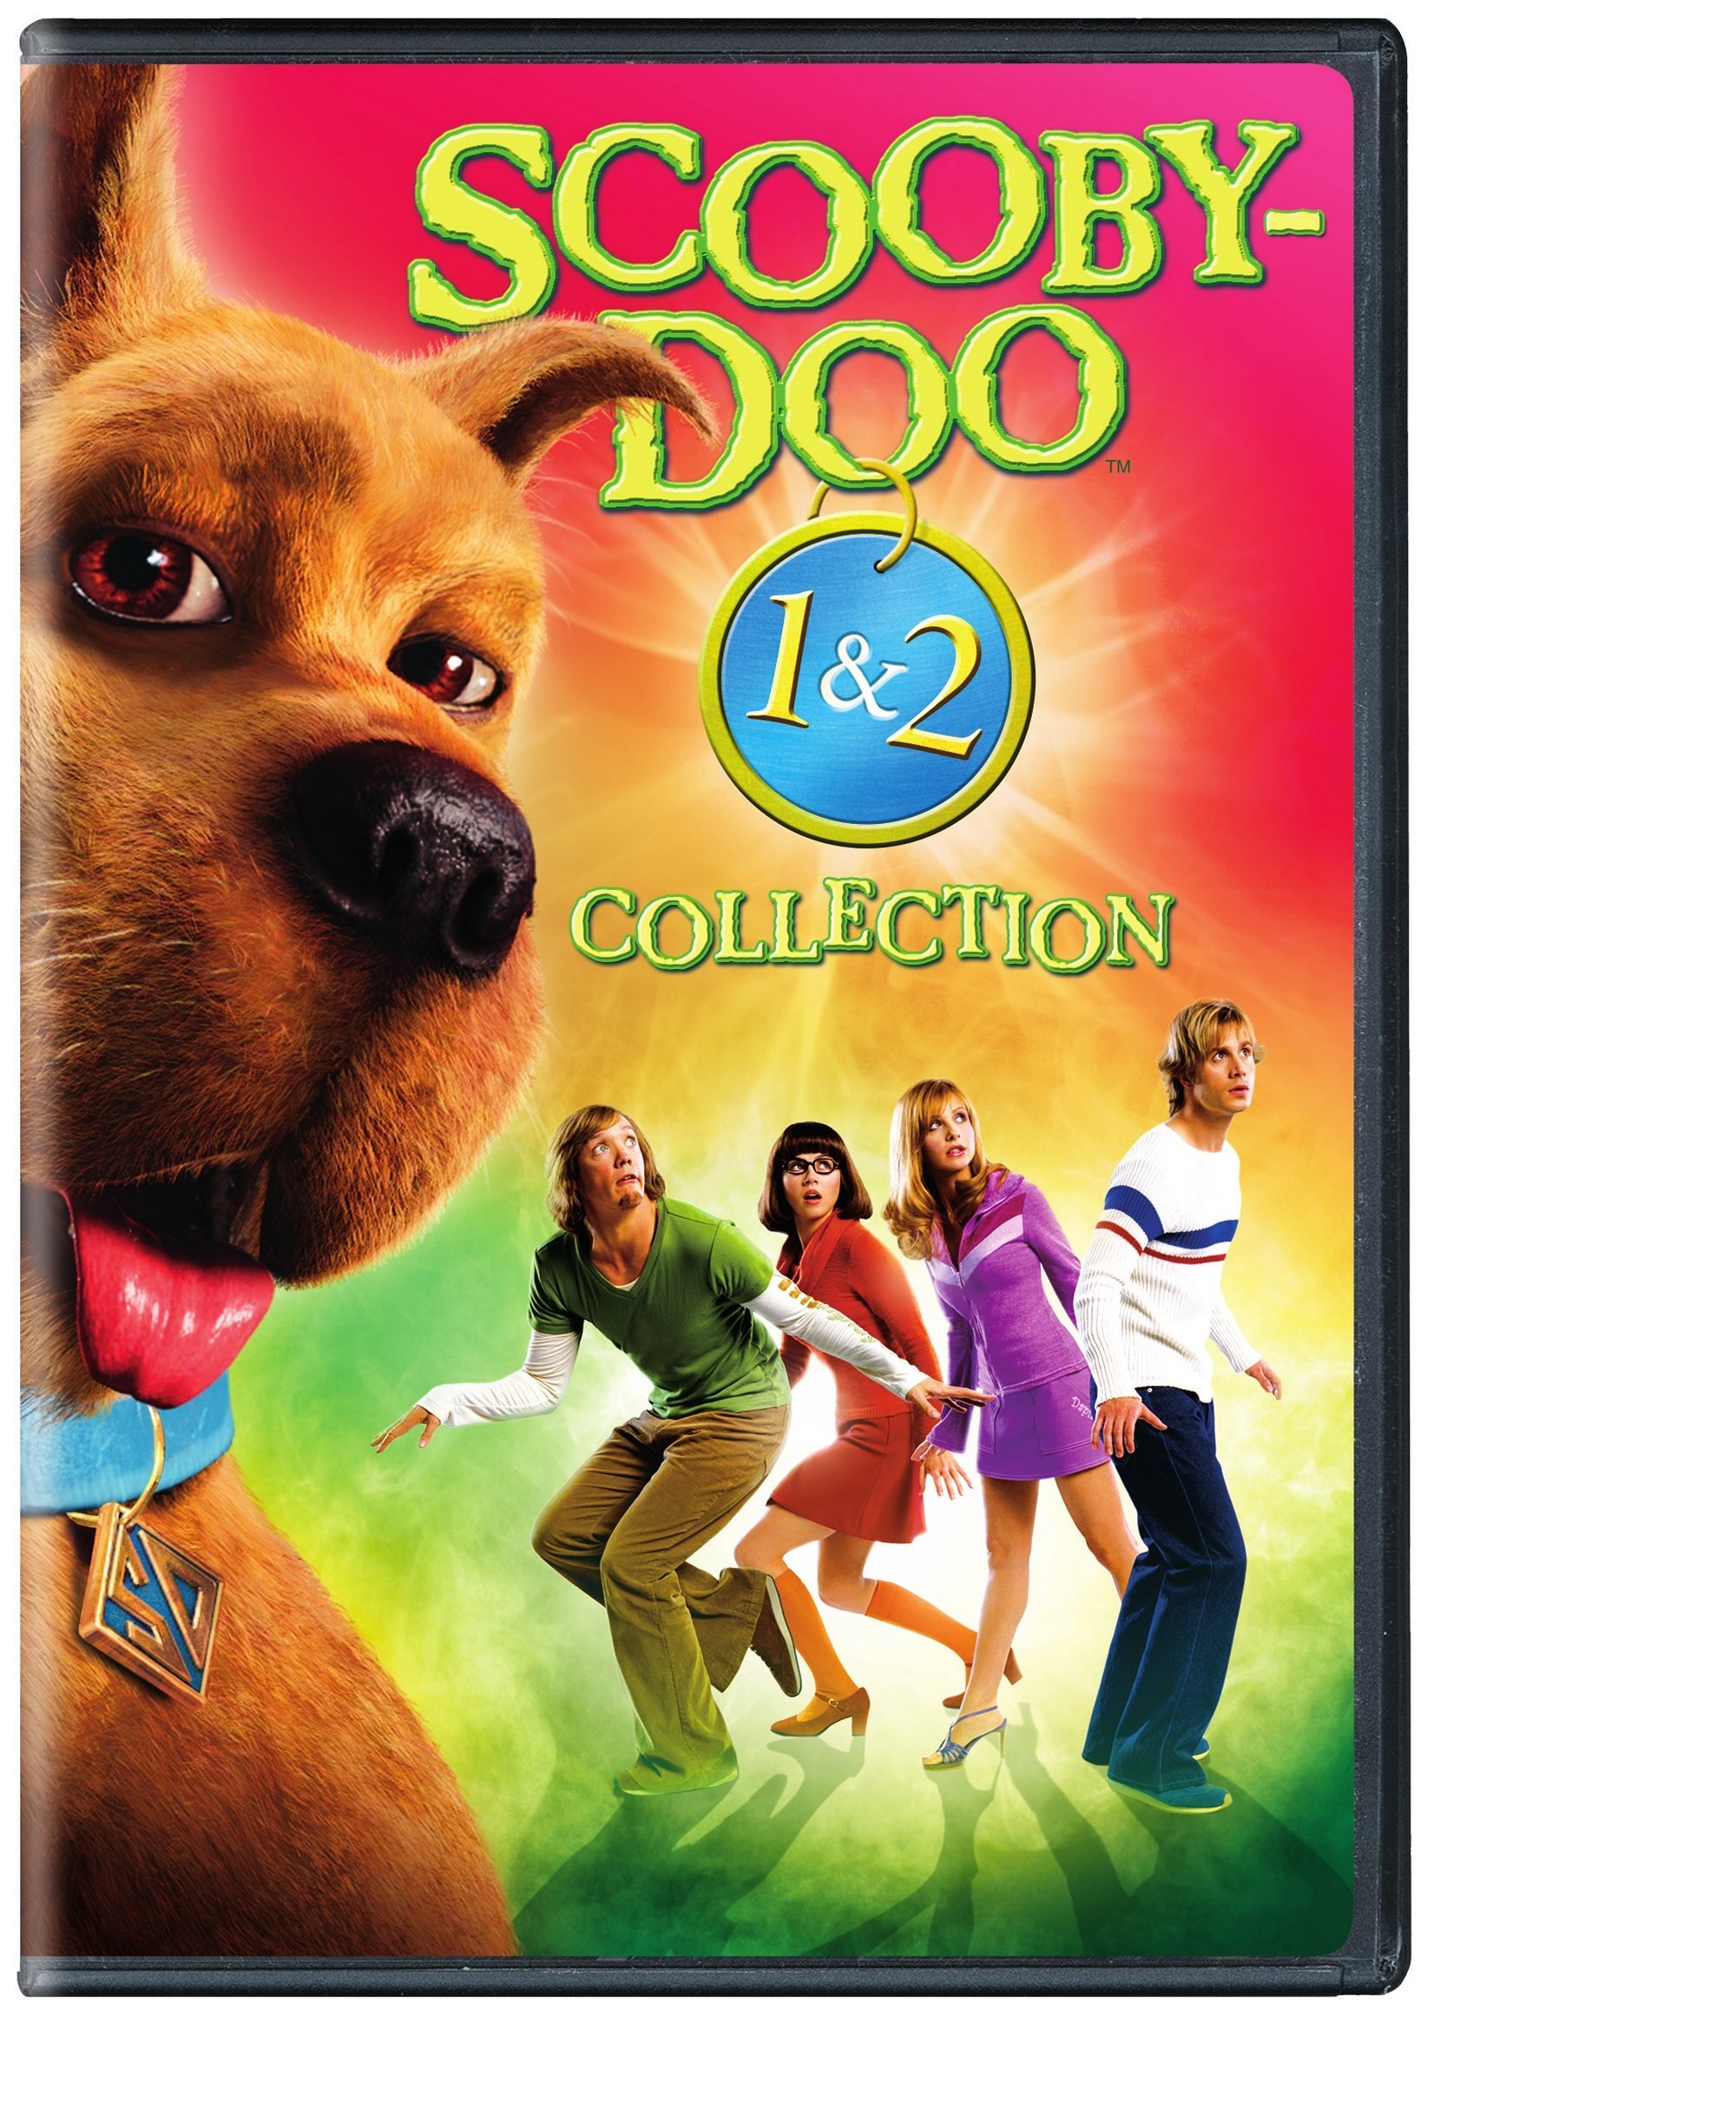 Scooby-Doo - The Movie/Scooby-Doo 2 - Monsters Unleashed (DVD New Box Art) - DVD [ 2004 ]  - Children Movies On DVD - Movies On GRUV